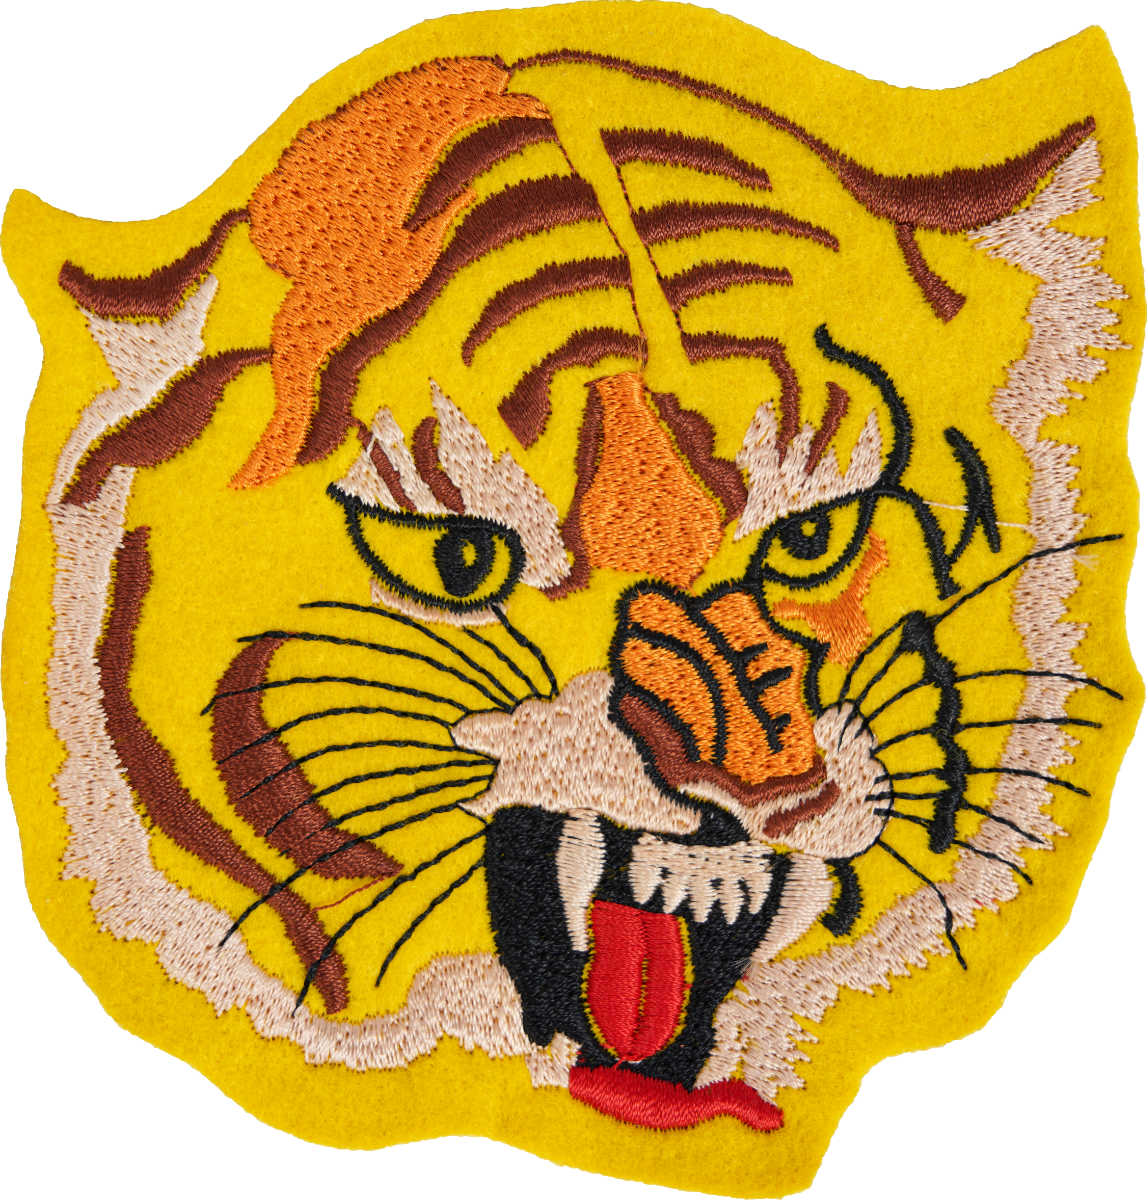 Tiger's Head Patch